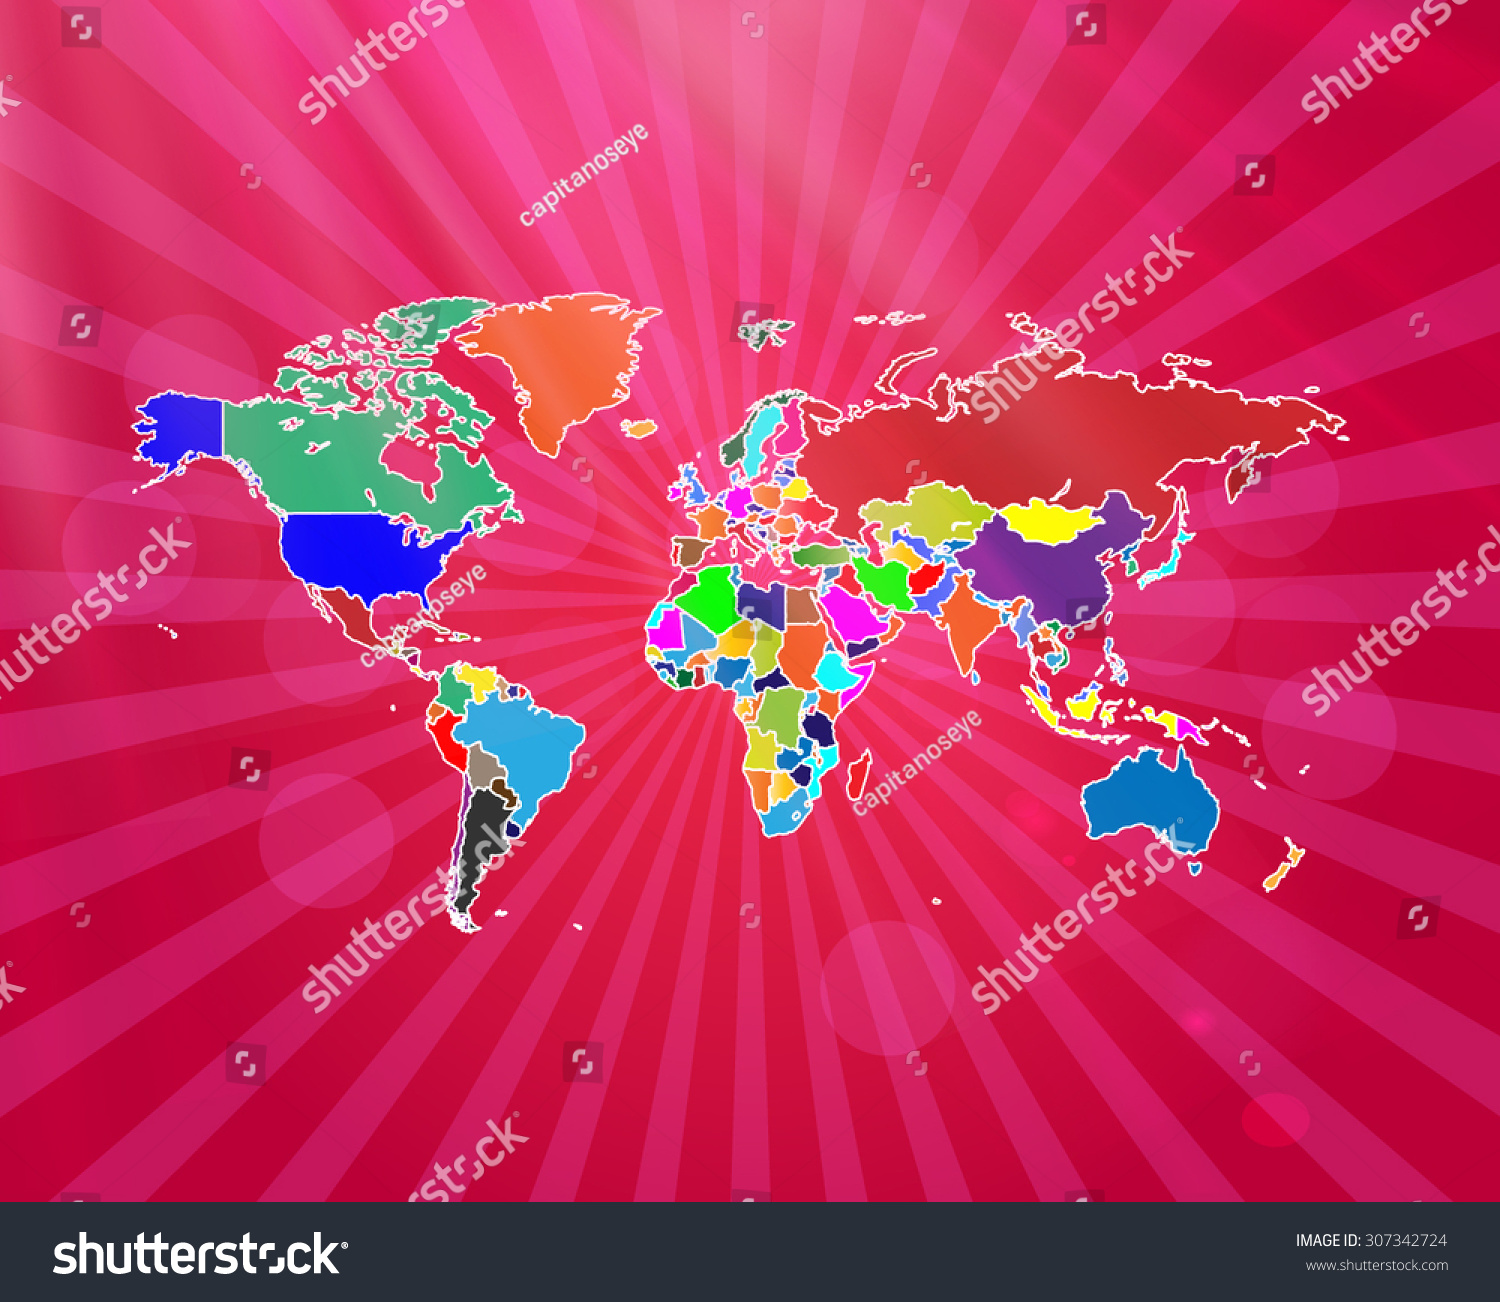 Detailed Map Of The World All Countries Royalty Free Stock Vector 307342724 1501